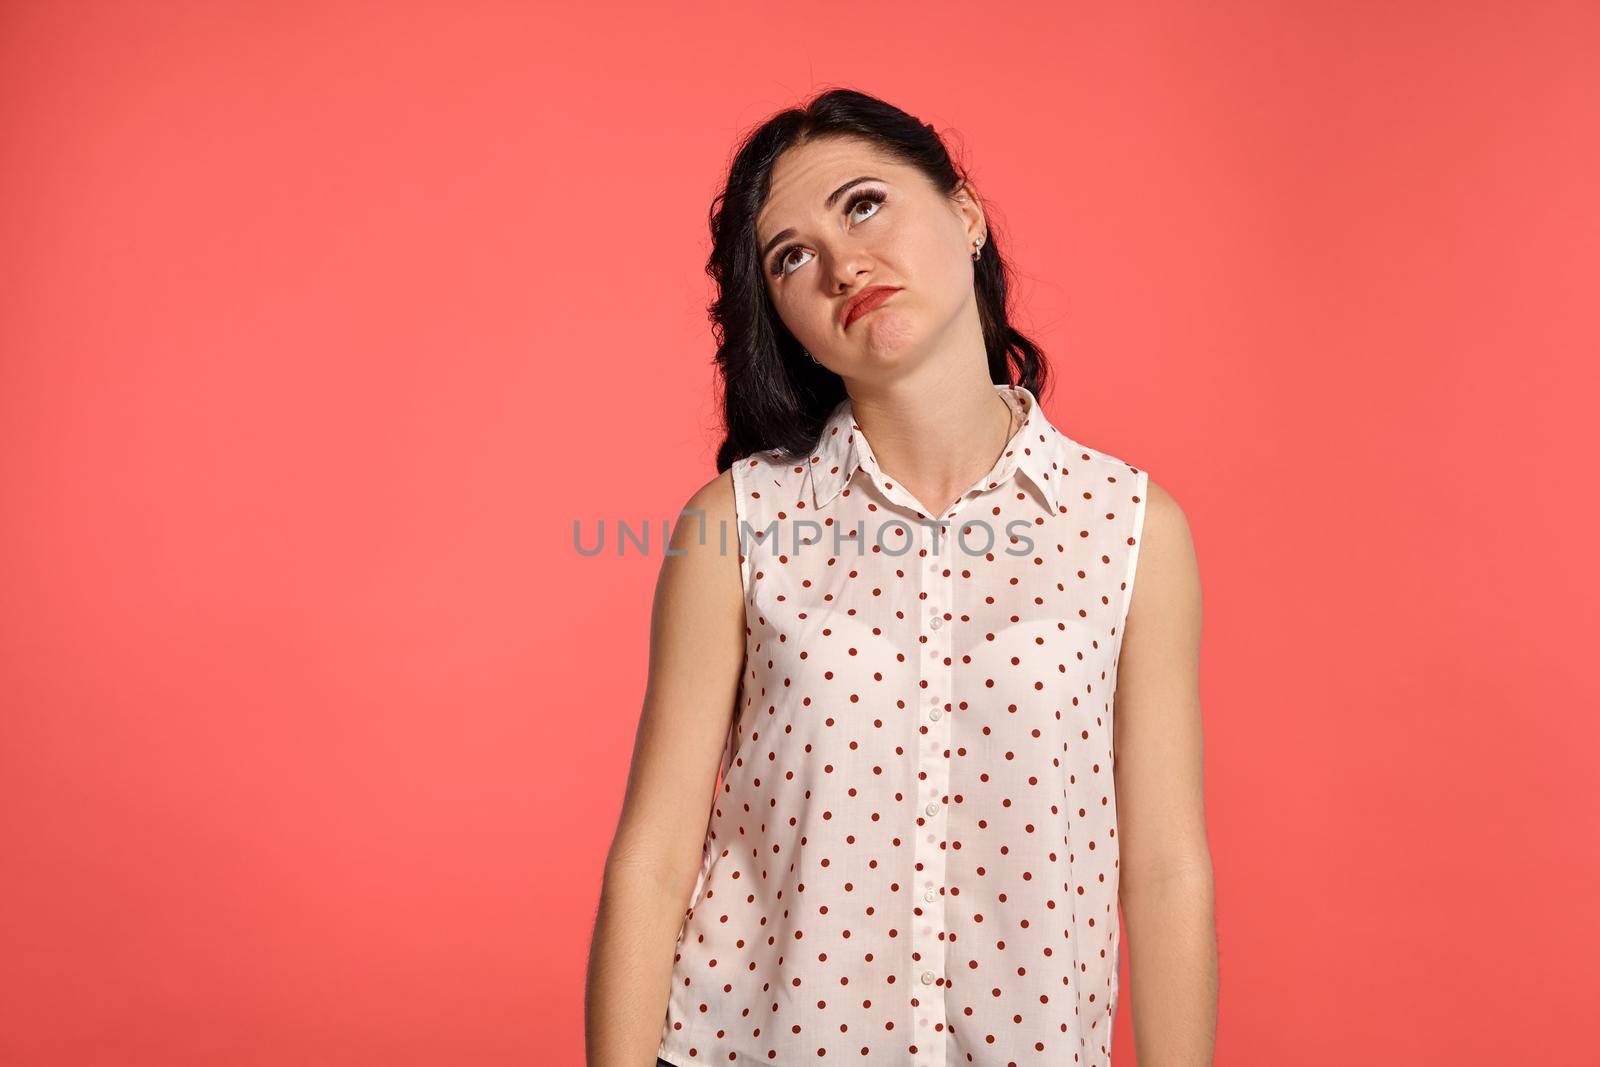 Studio shot of an adorable girl teenager looking unhappy, wearing casual white polka dot blouse. Little brunette female posing over a pink background. People and sincere emotions.